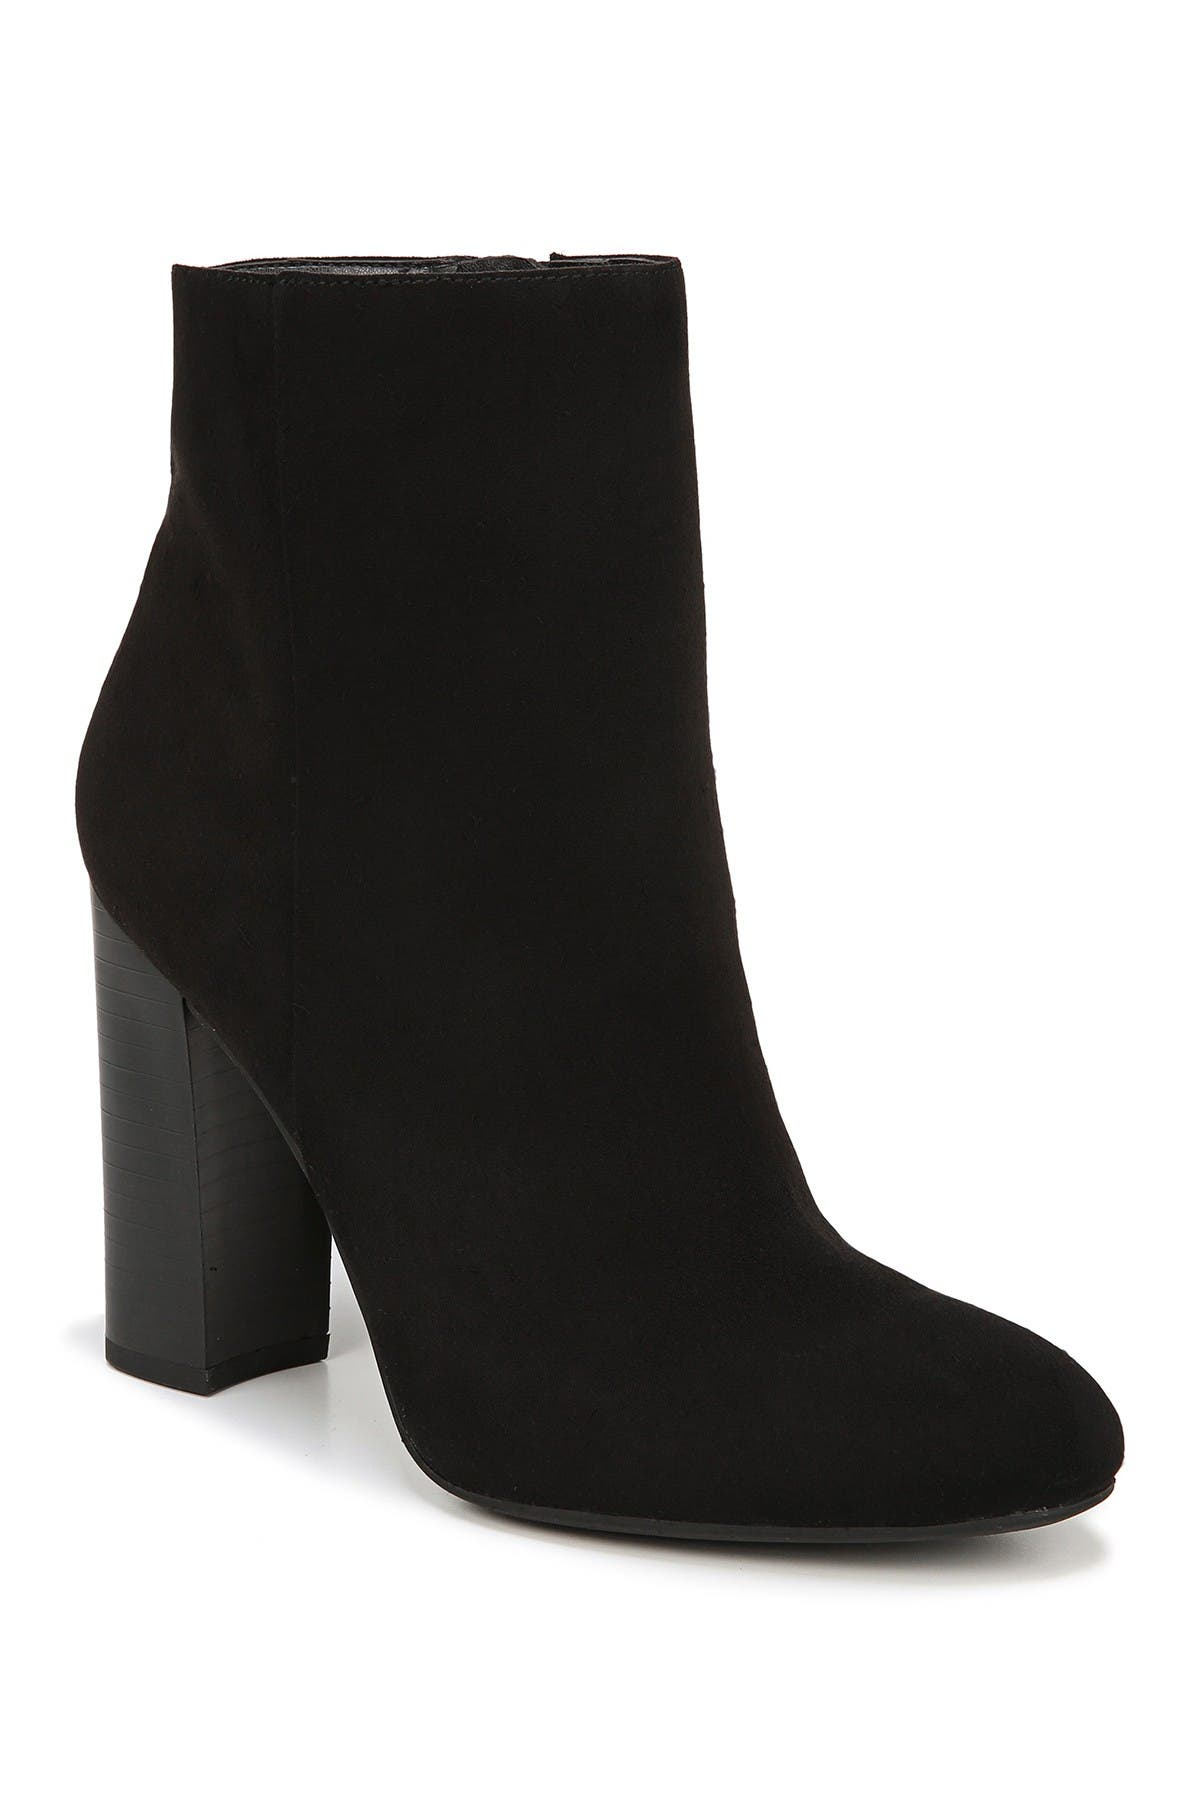 circus by sam edelman connelly booties